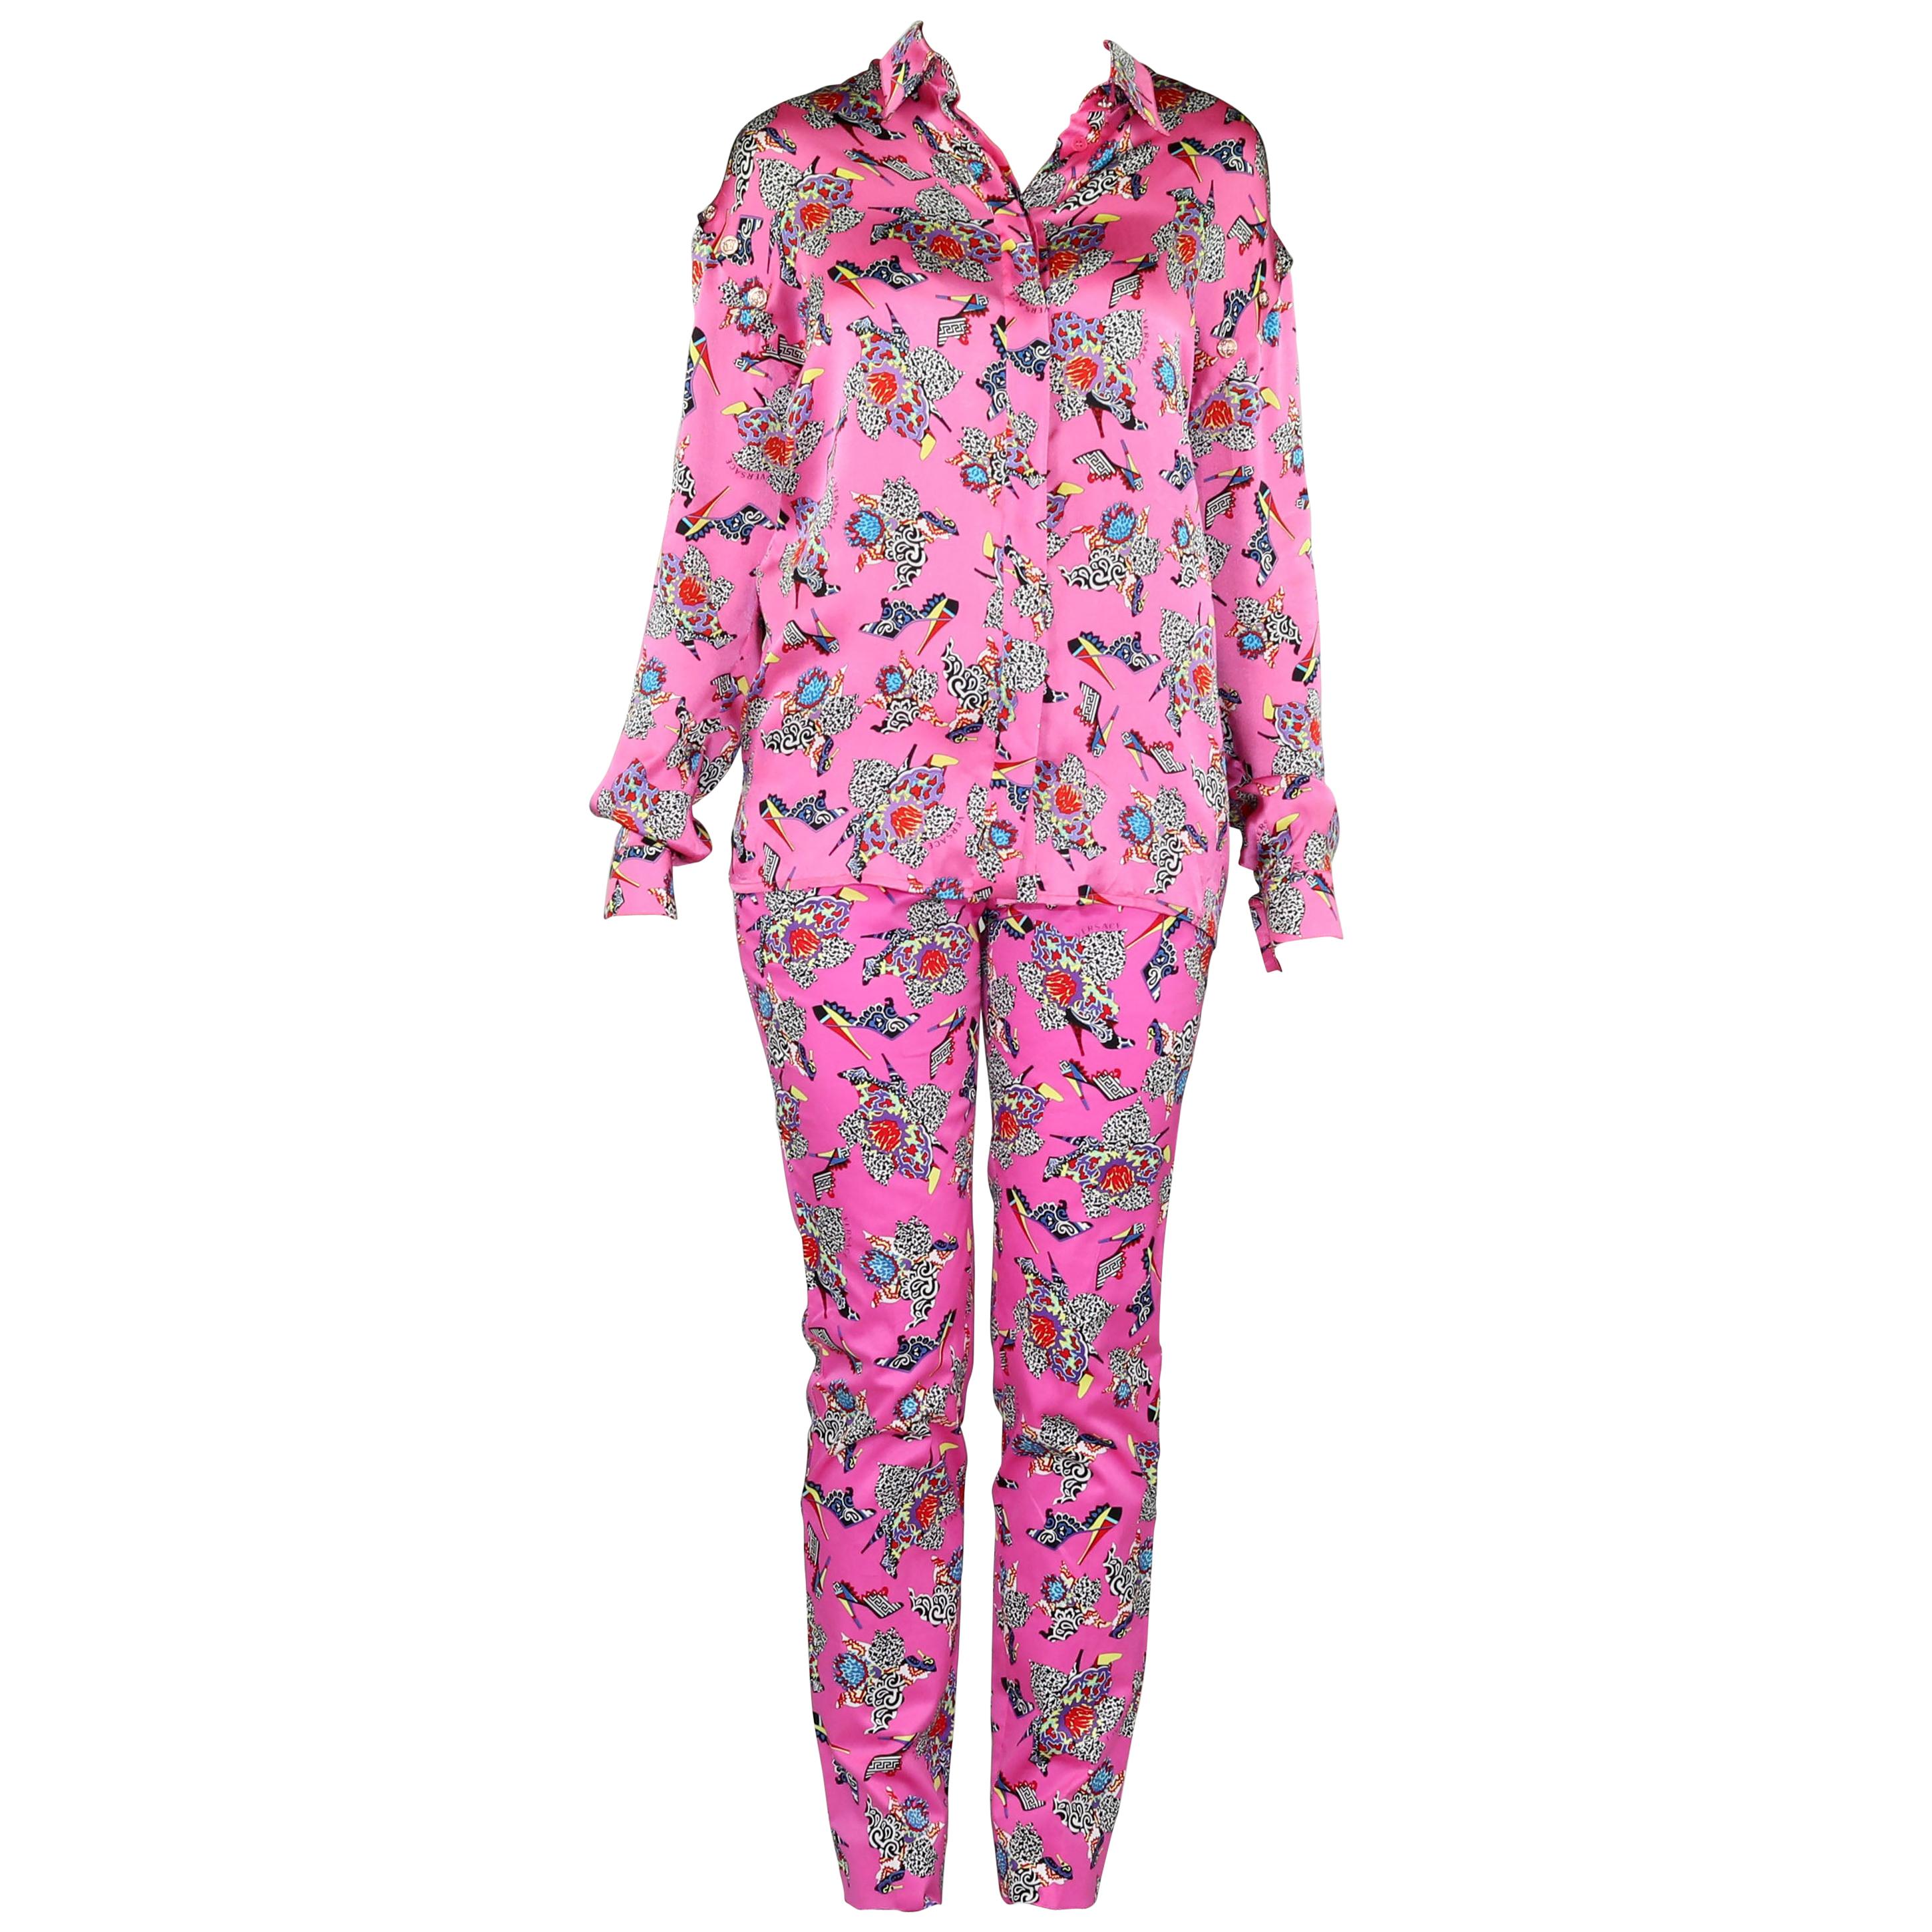 Resort 2013 Look # 8 NEW VERSACE ICONIC PRINT SILK and COTTON PANT SUIT 38 - 2 For Sale